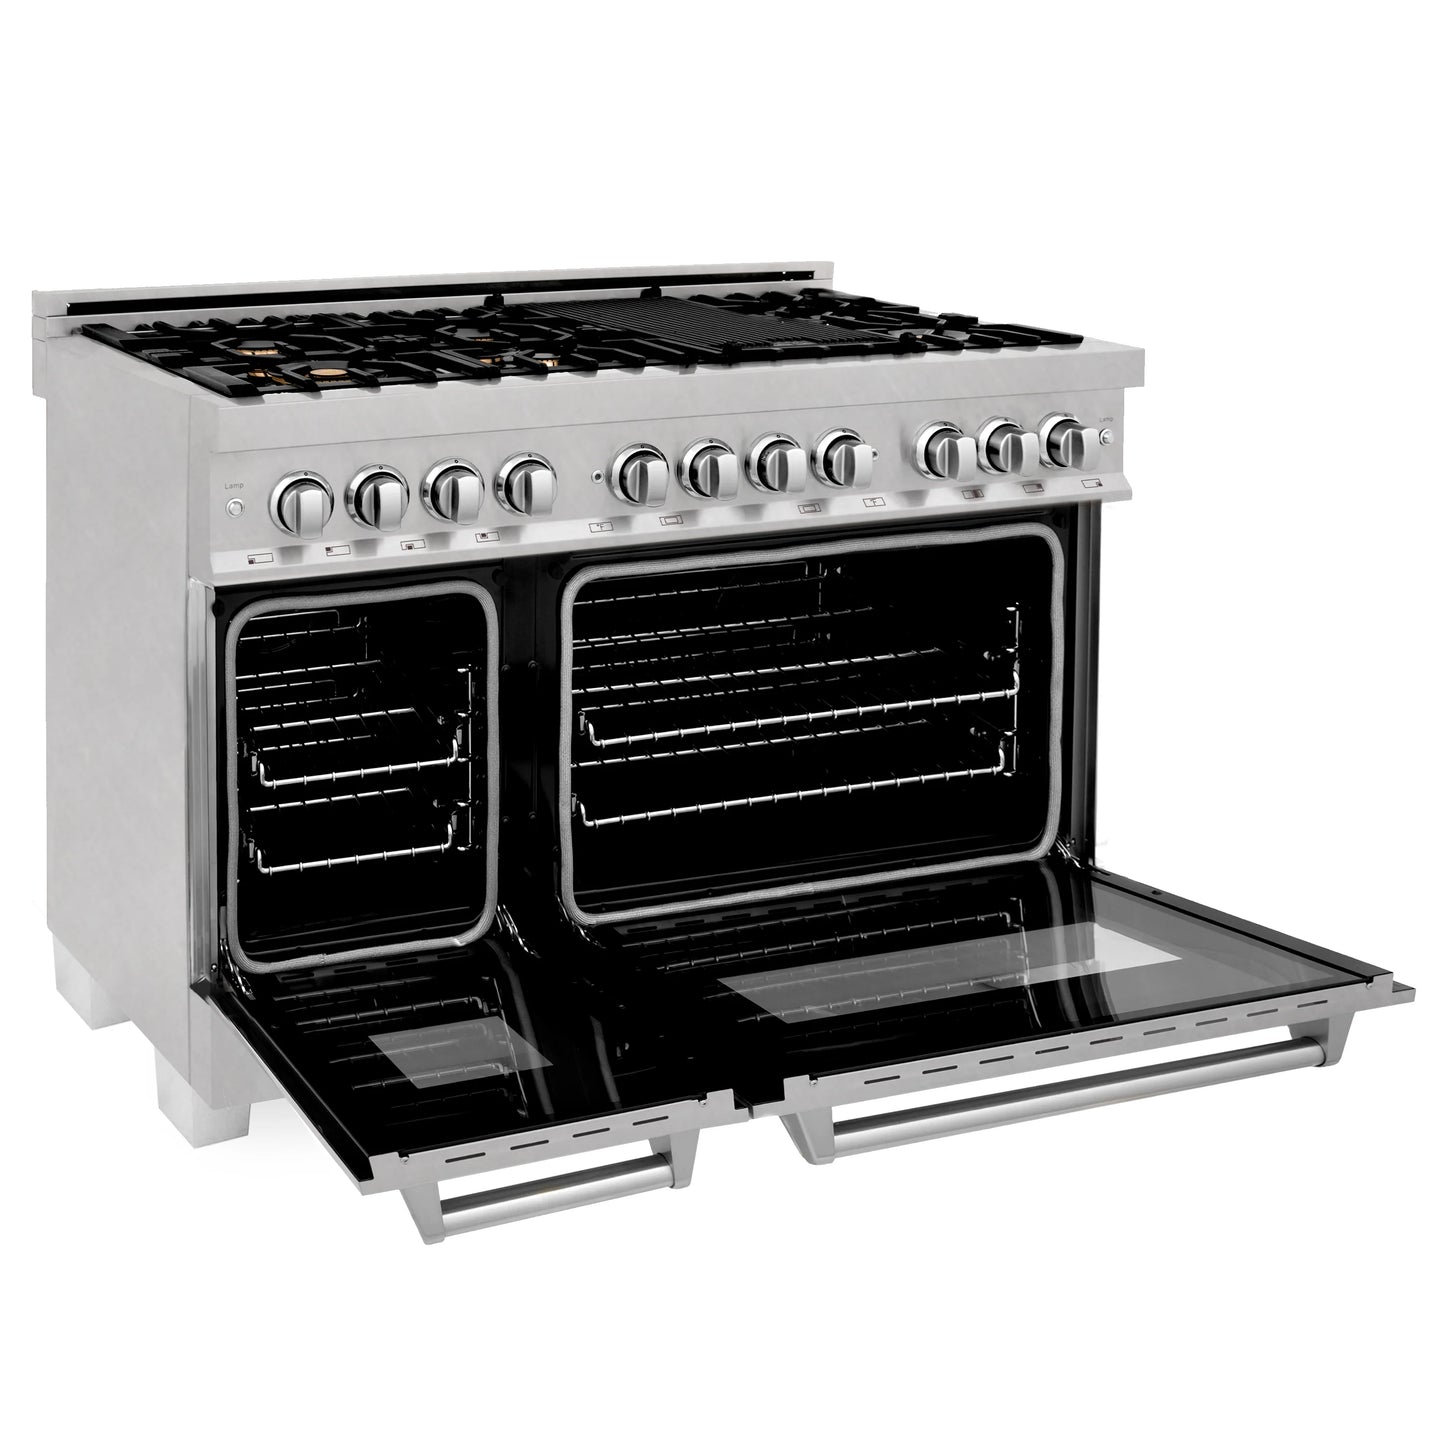 ZLINE 48 in. Dual Fuel Range with Gas Stove and Electric Oven in All Fingerprint Resistant Stainless Steel with Brass Burners (RAS-SN-BR-48)